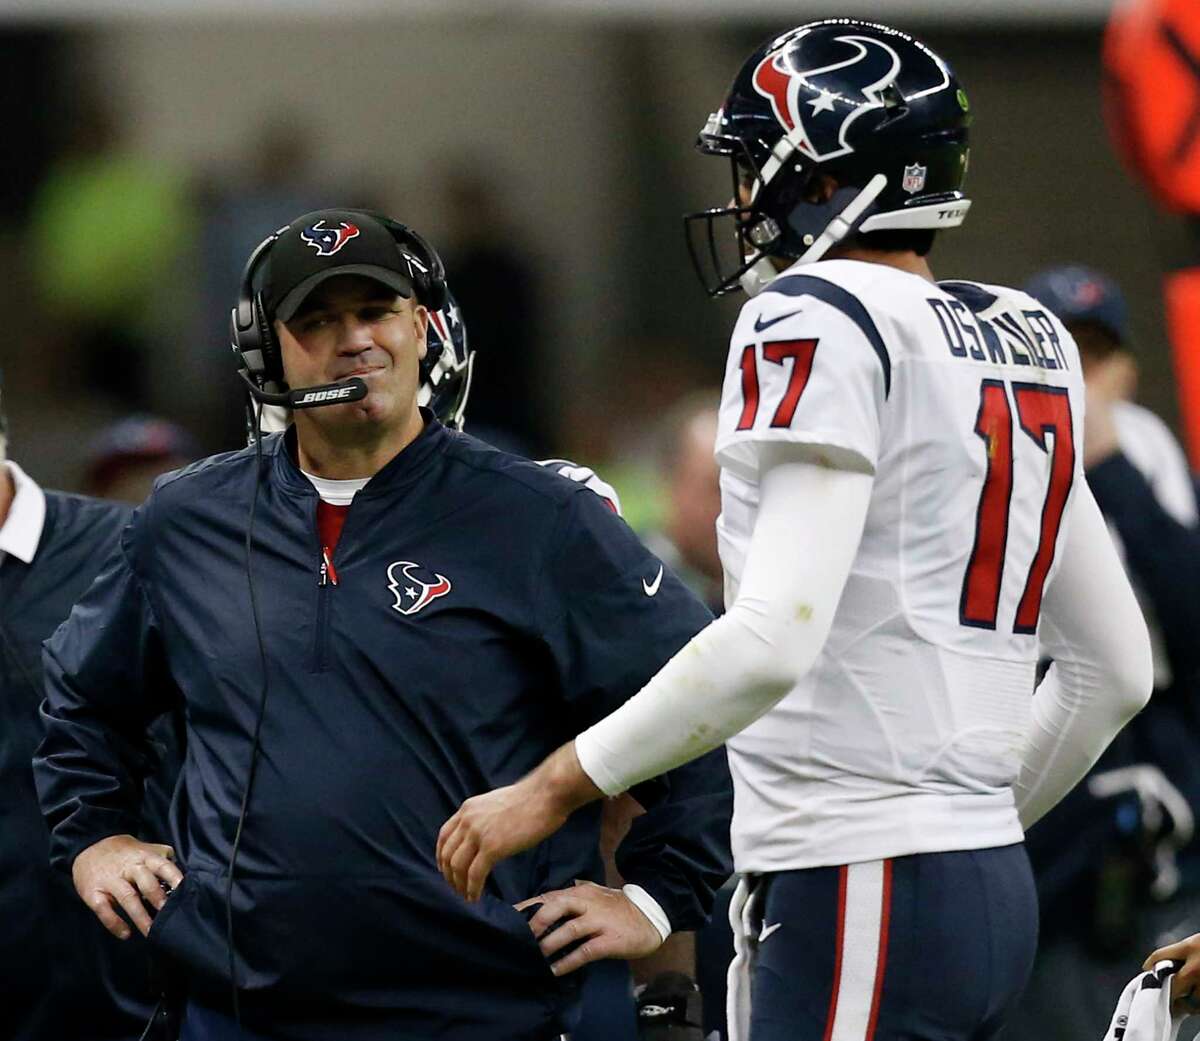 Houston Texans head coach Bill O'Brien stands by quarterback Brock Osweiler (17) as he walks to the sidelines during a time out during the fourth quarter against the Oakland Raiders of an NFL football game at Estadio Azteca on Monday, Nov. 21, 2016, in Mexico City. ( Brett Coomer / Houston Chronicle )